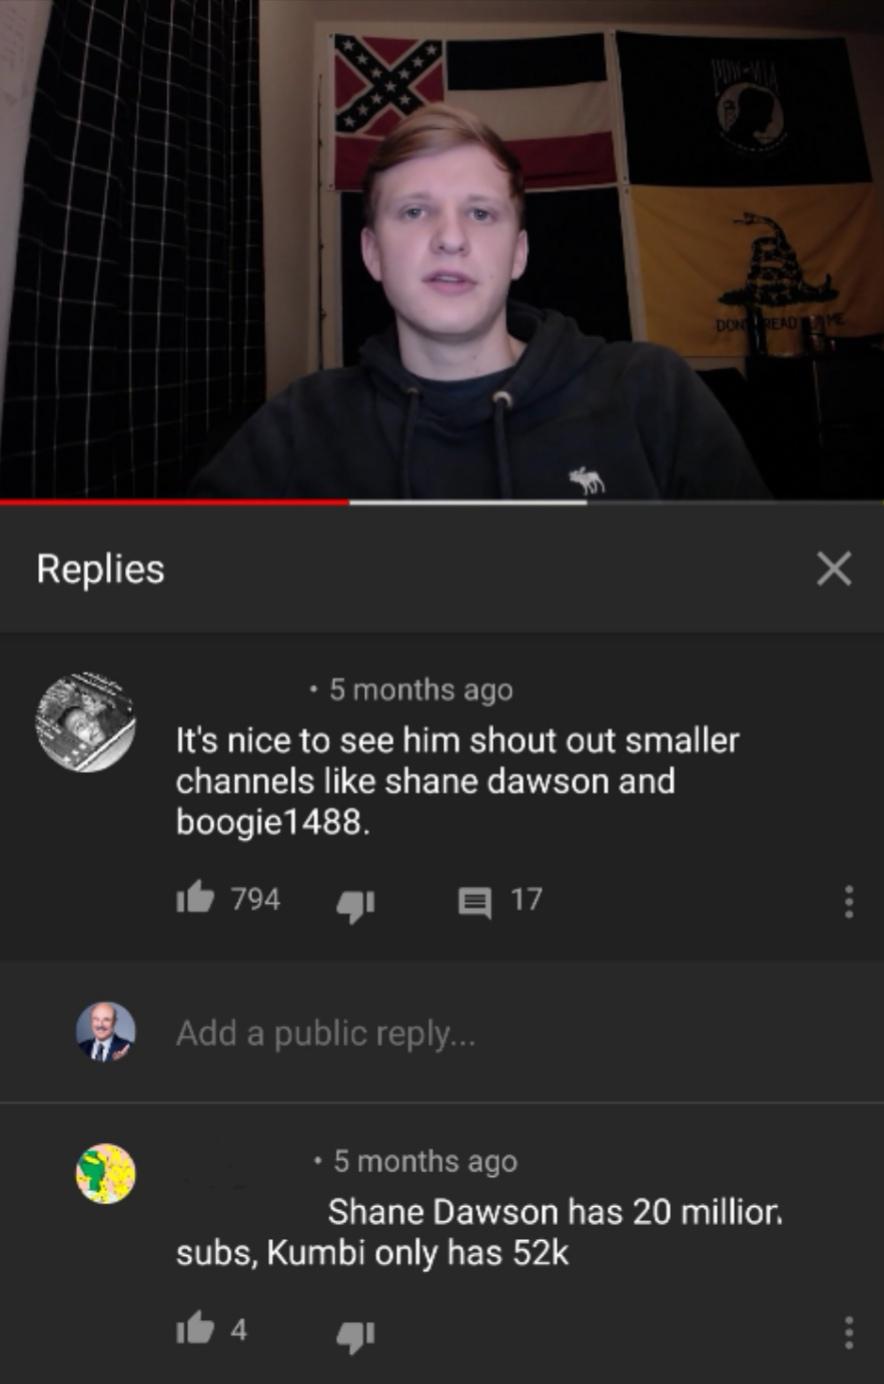 screenshot - Dograde Replies 5 months ago 'It's nice to see him shout out smaller channels shane dawson and boogie 1488. it 794 J E 17 Add a public ... 5 months ago Shane Dawson has 20 million subs, Kumbi only has 52k it 4 4